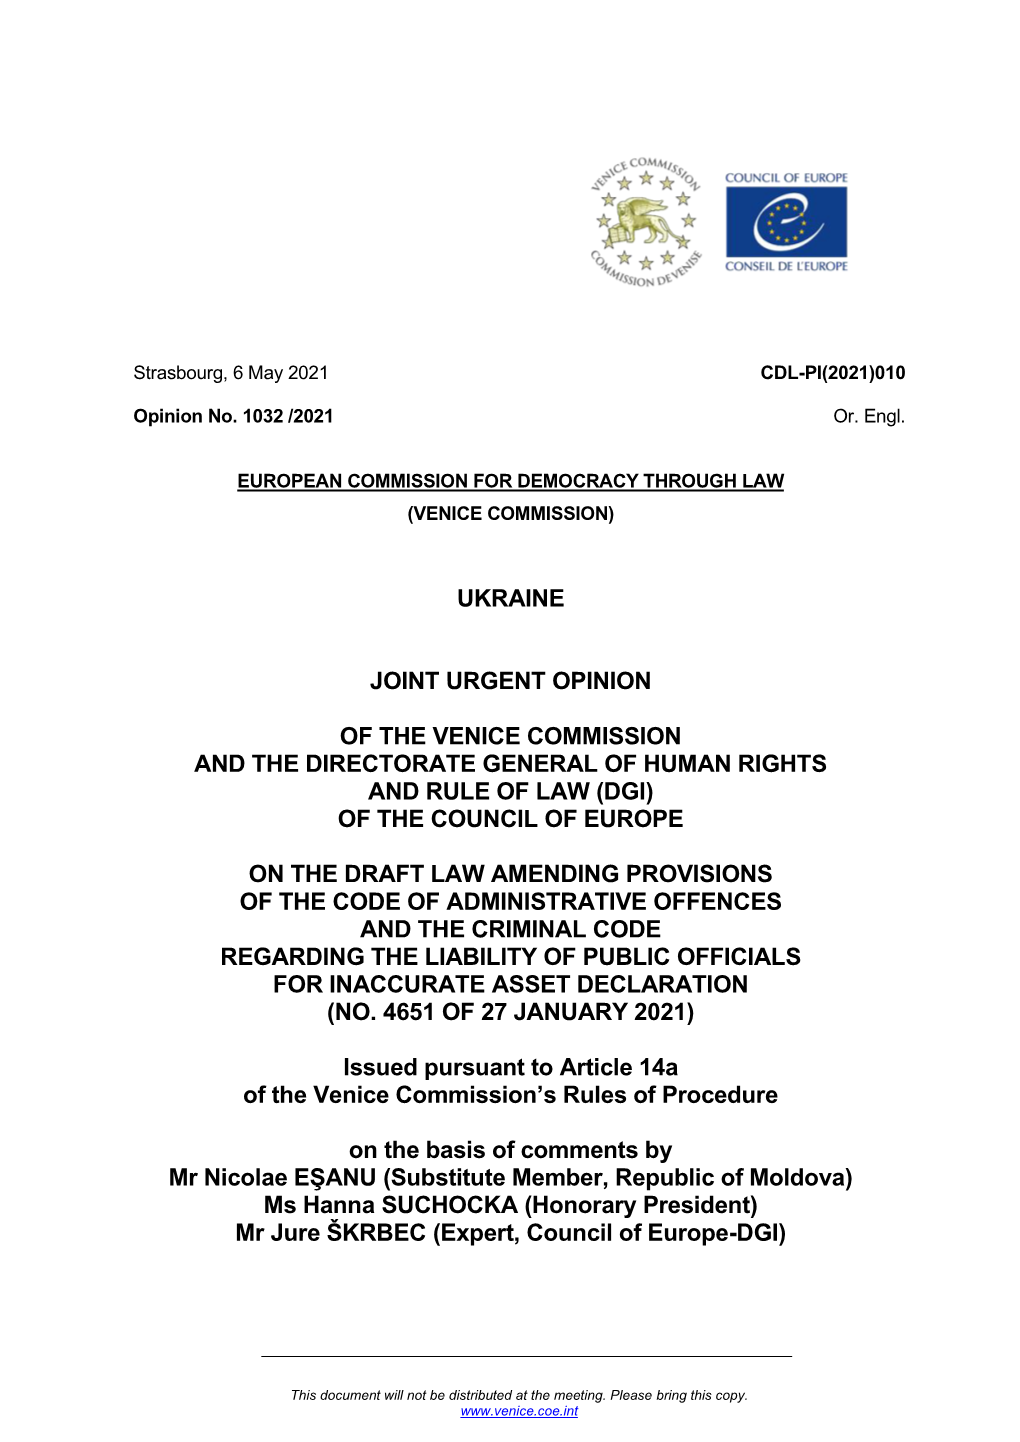 Ukraine Joint Urgent Opinion of the Venice Commission and the Directorate General of Human Rights and Rule of Law (Dgi) Of